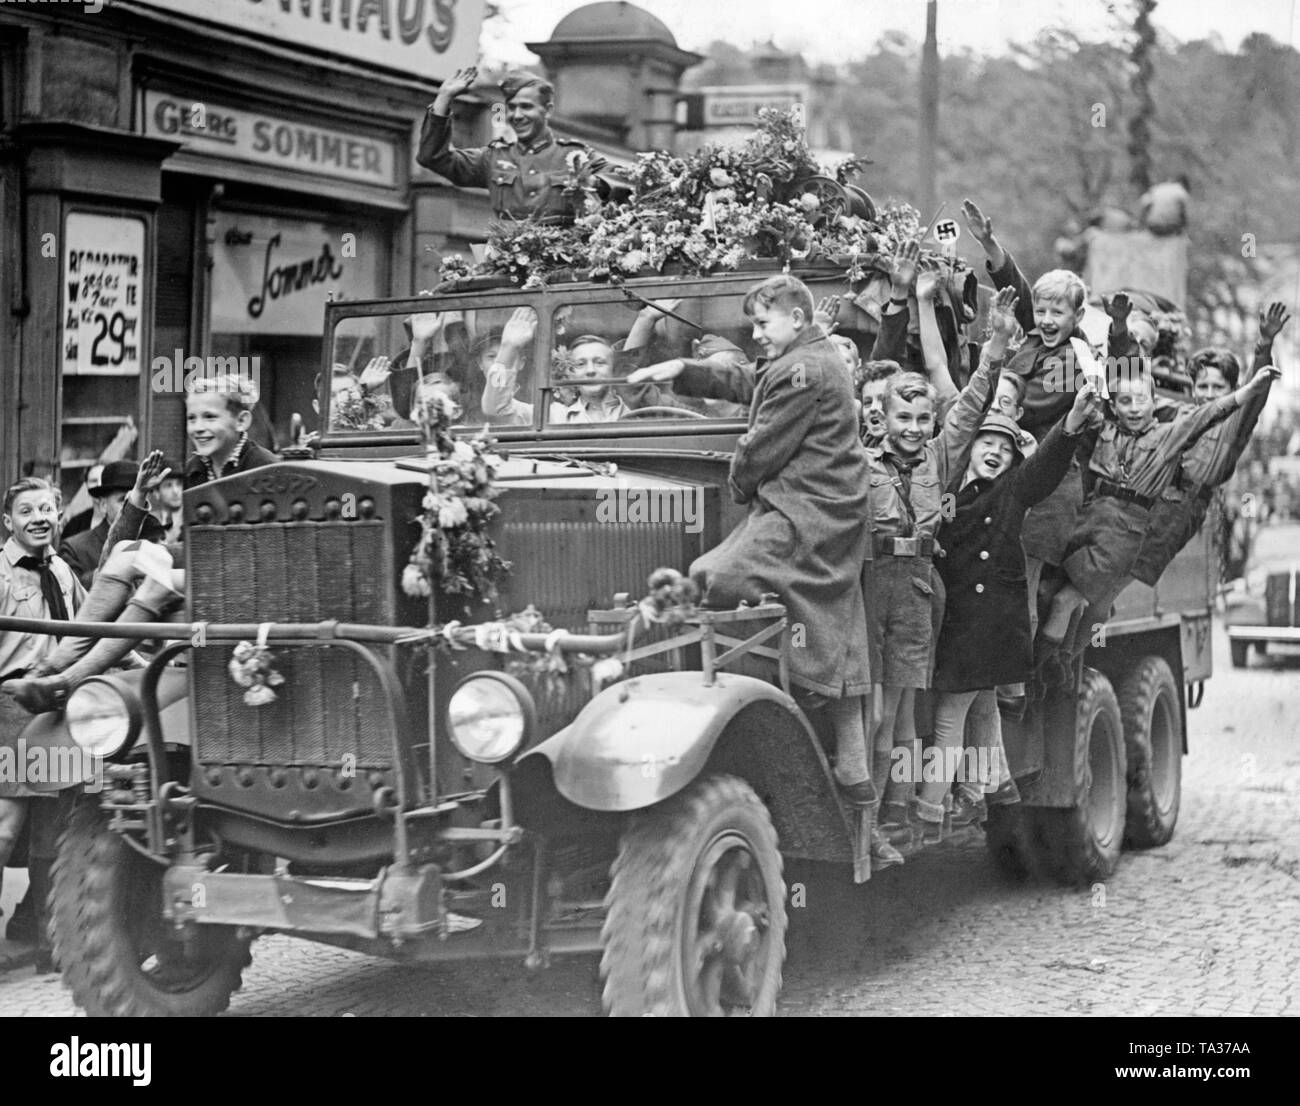 People receive the retreating German troops in Karlsbad (today Karlovy Vary) on October 4, 1938. Some children have climbed on a truck, and accompany them. The truck is decorated with flowers. Stock Photo